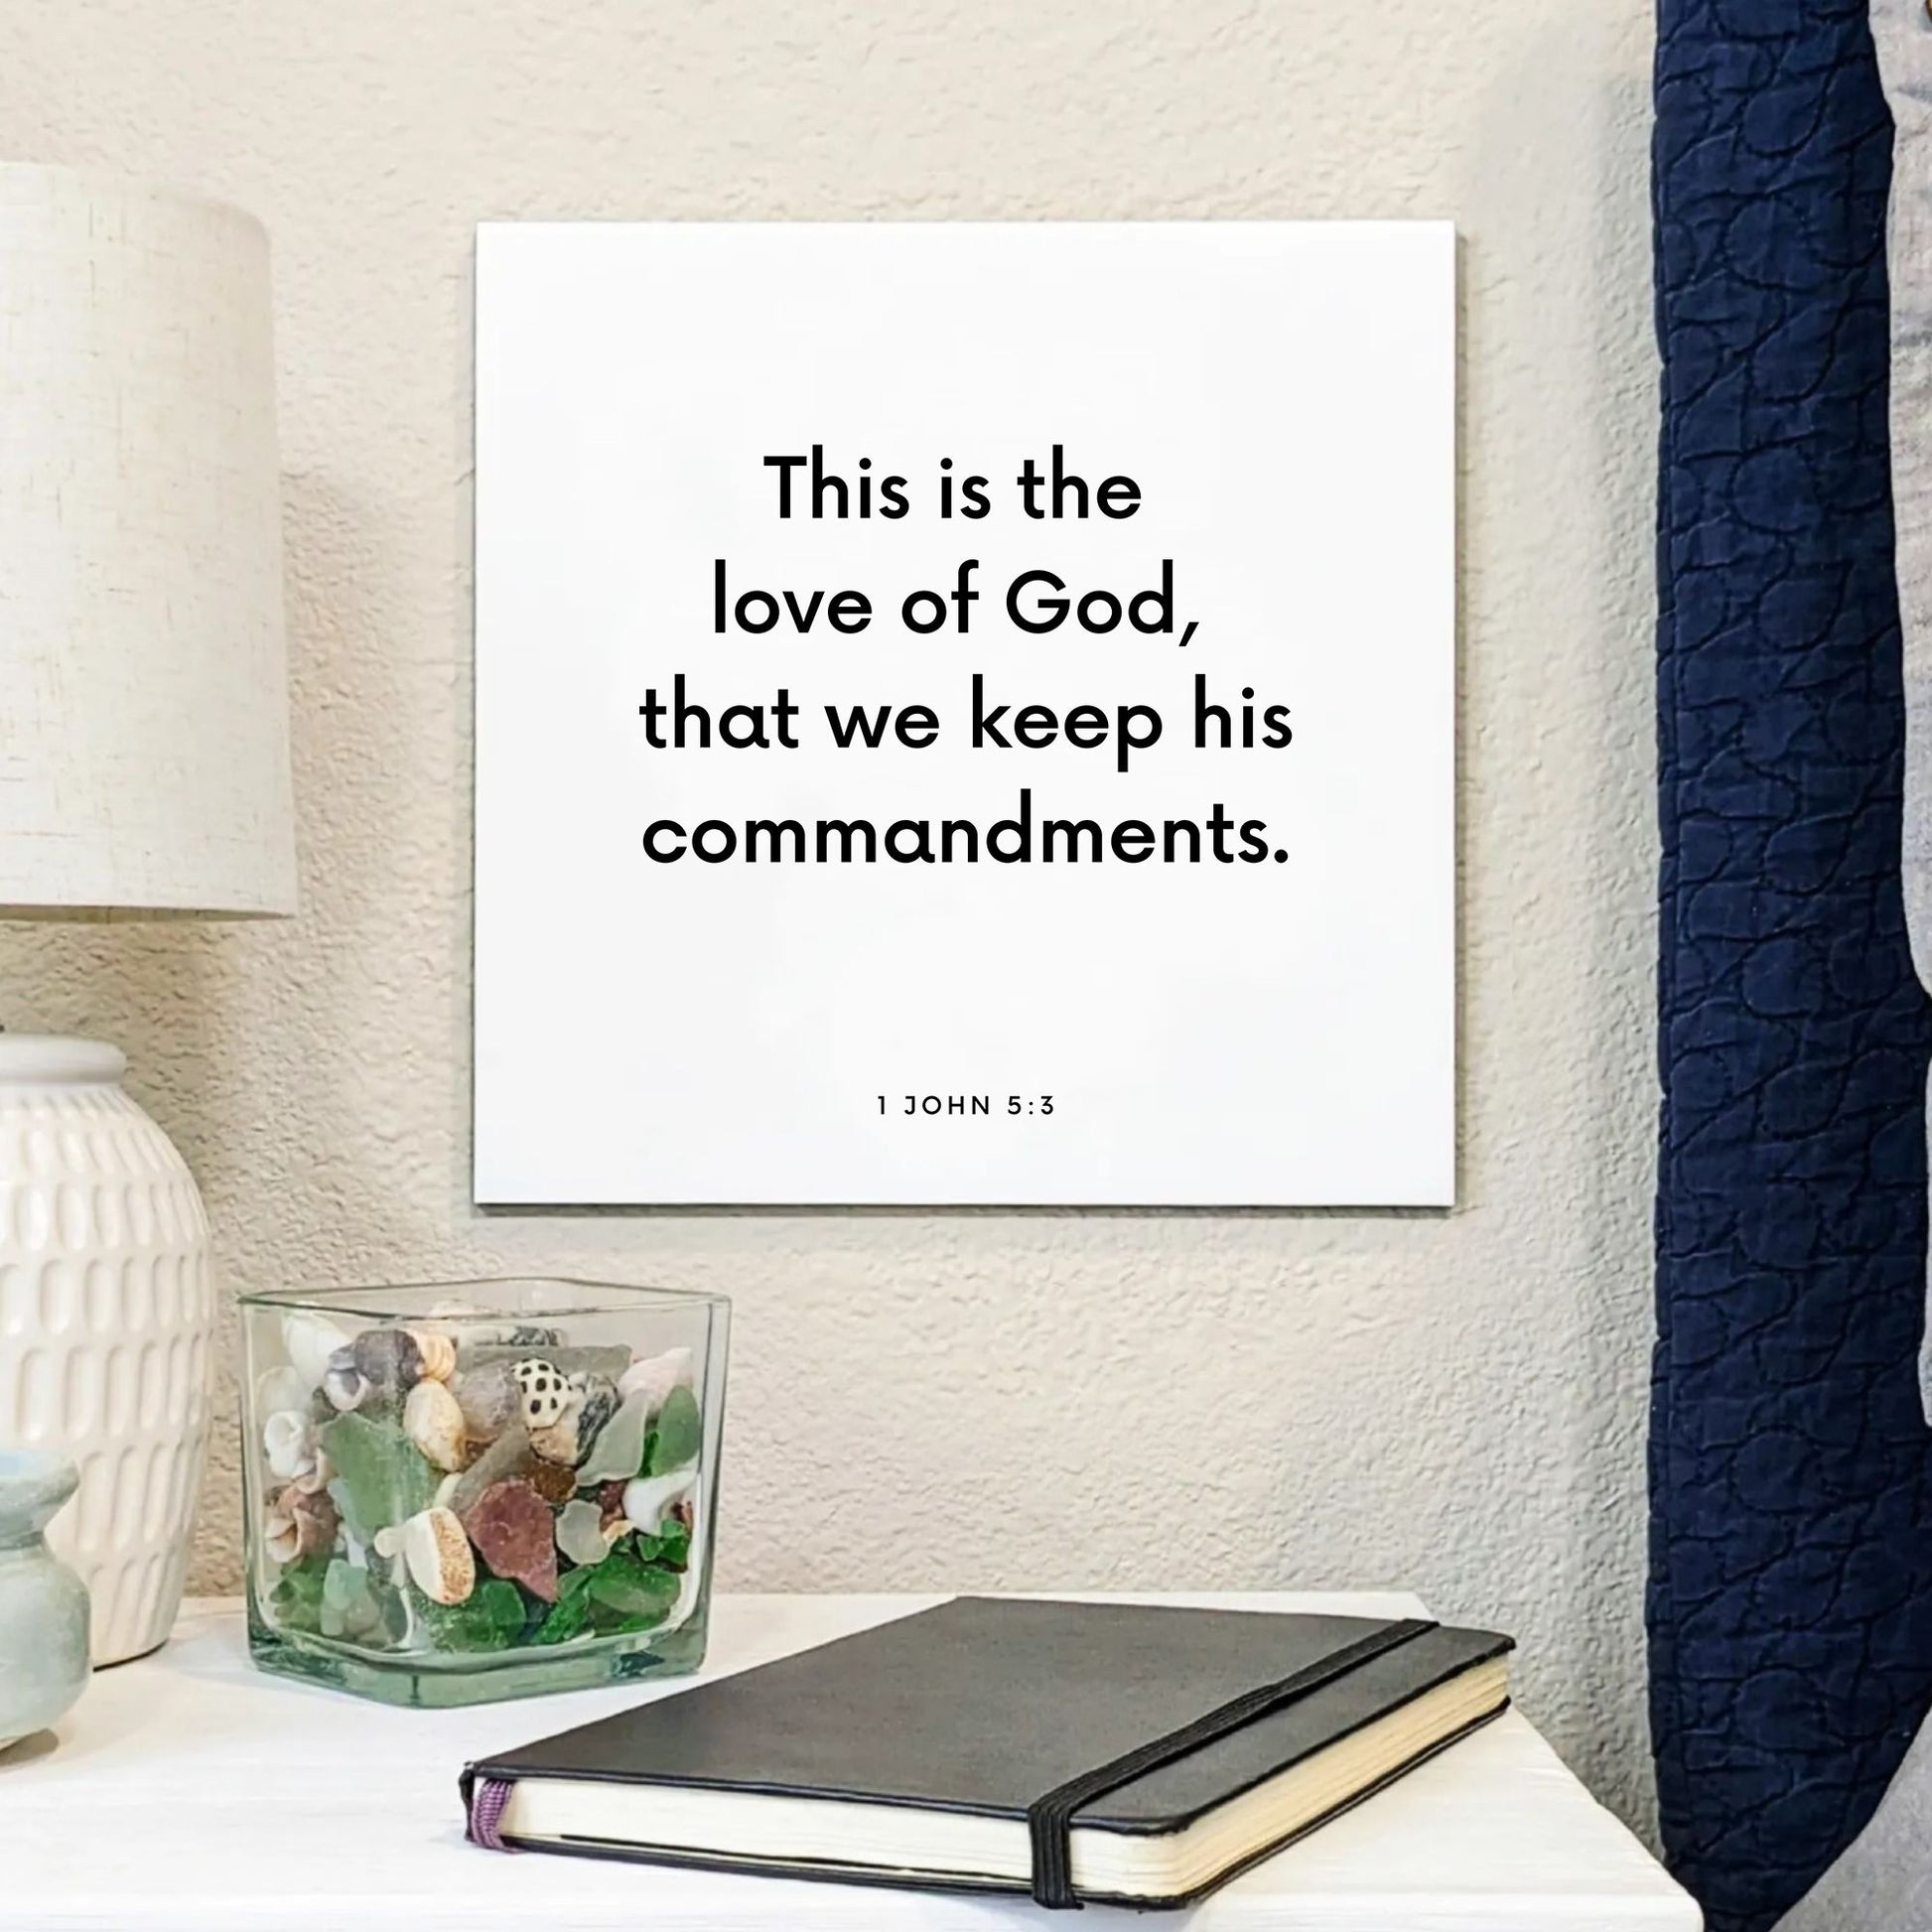 Bedside mouting of the scripture tile for 1 John 5:3 - "This is the love of God, that we keep his commandments"